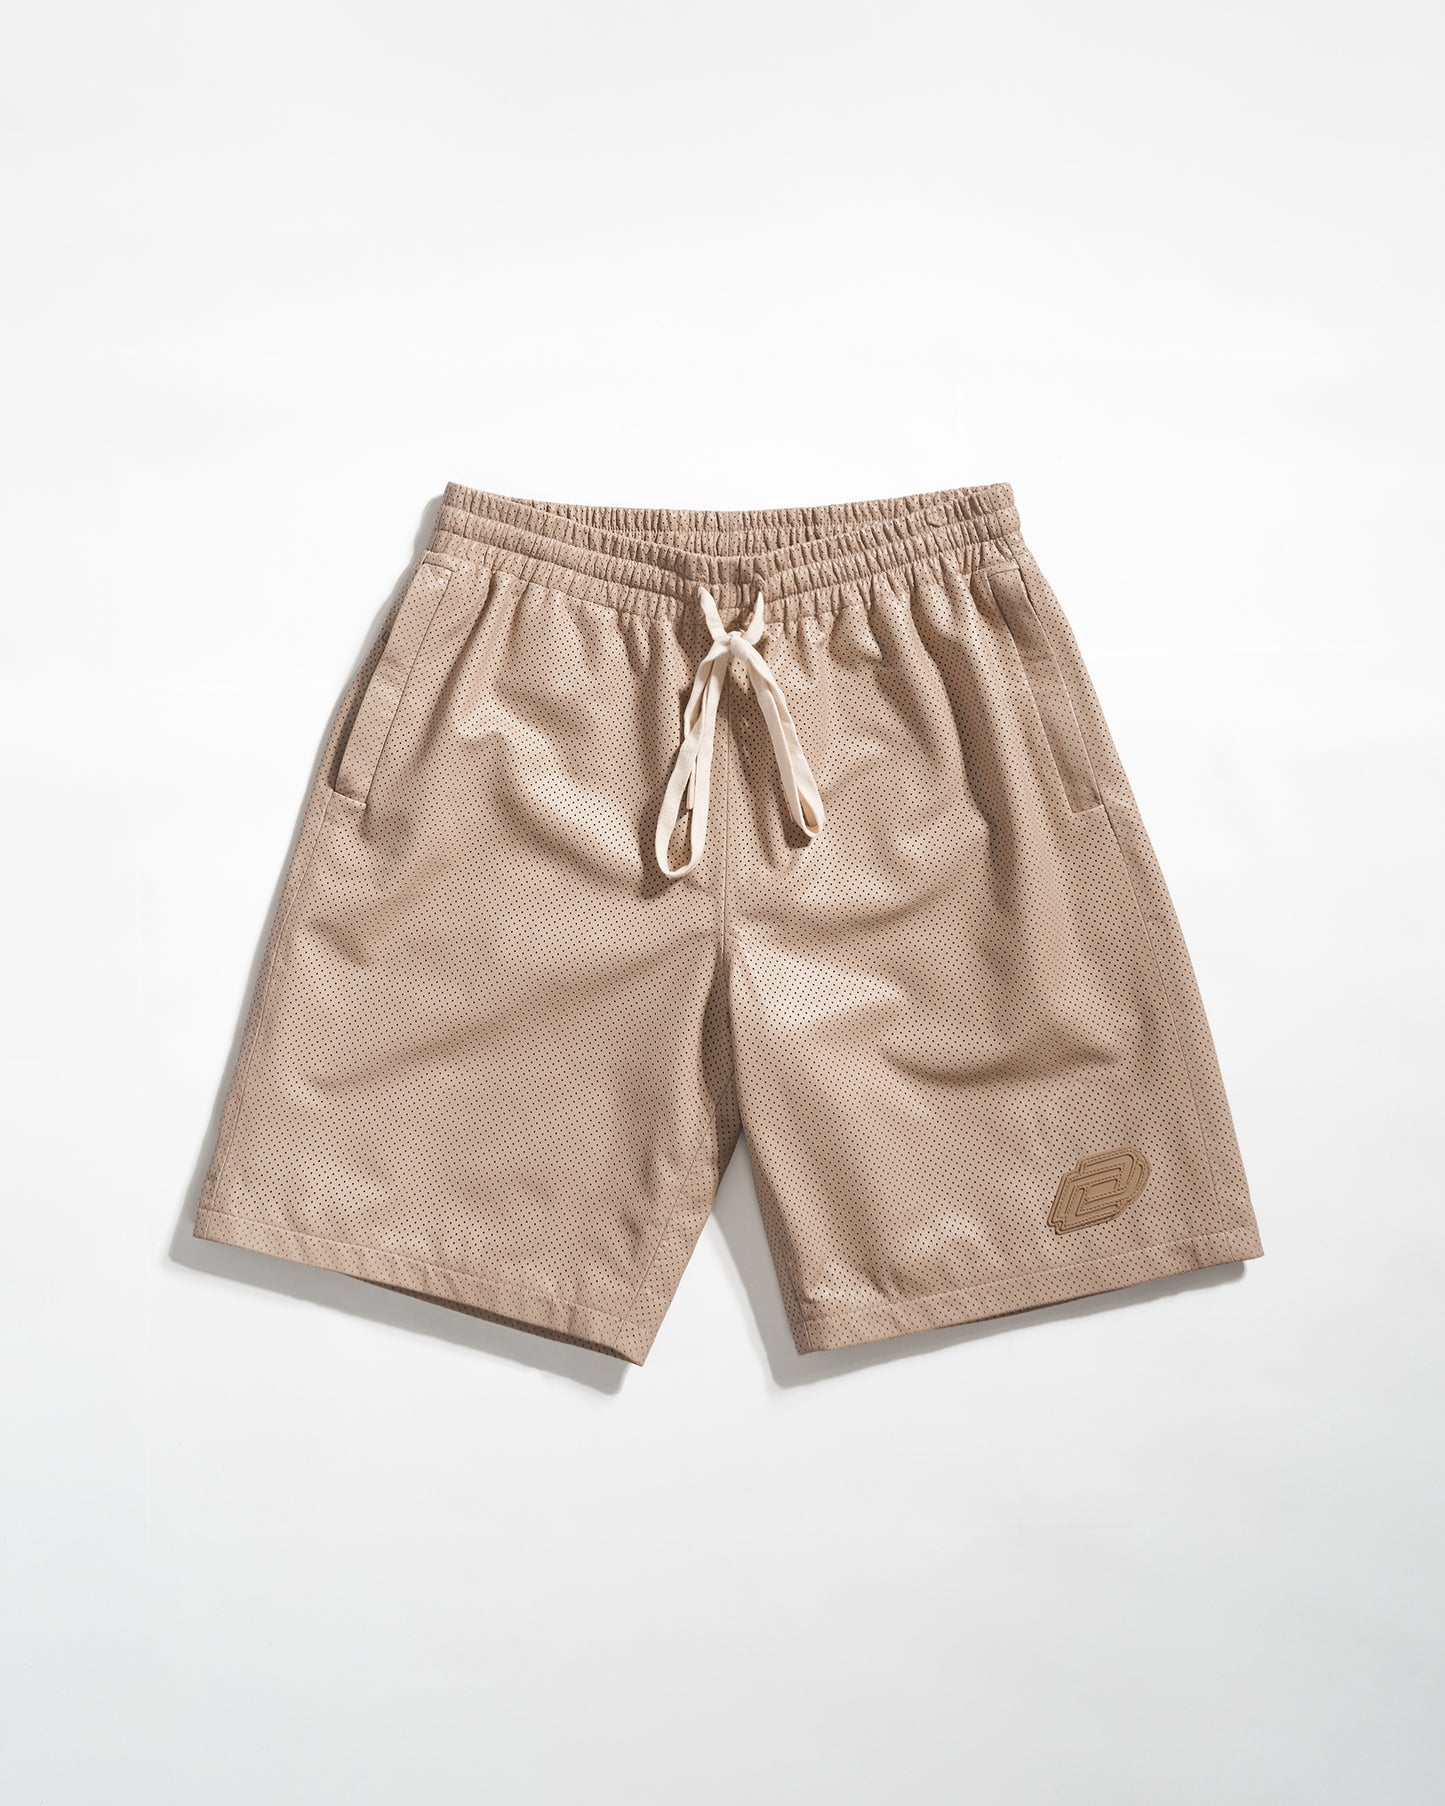 PERFORATED LEATHER SHORTS - Due Diligence Apparel